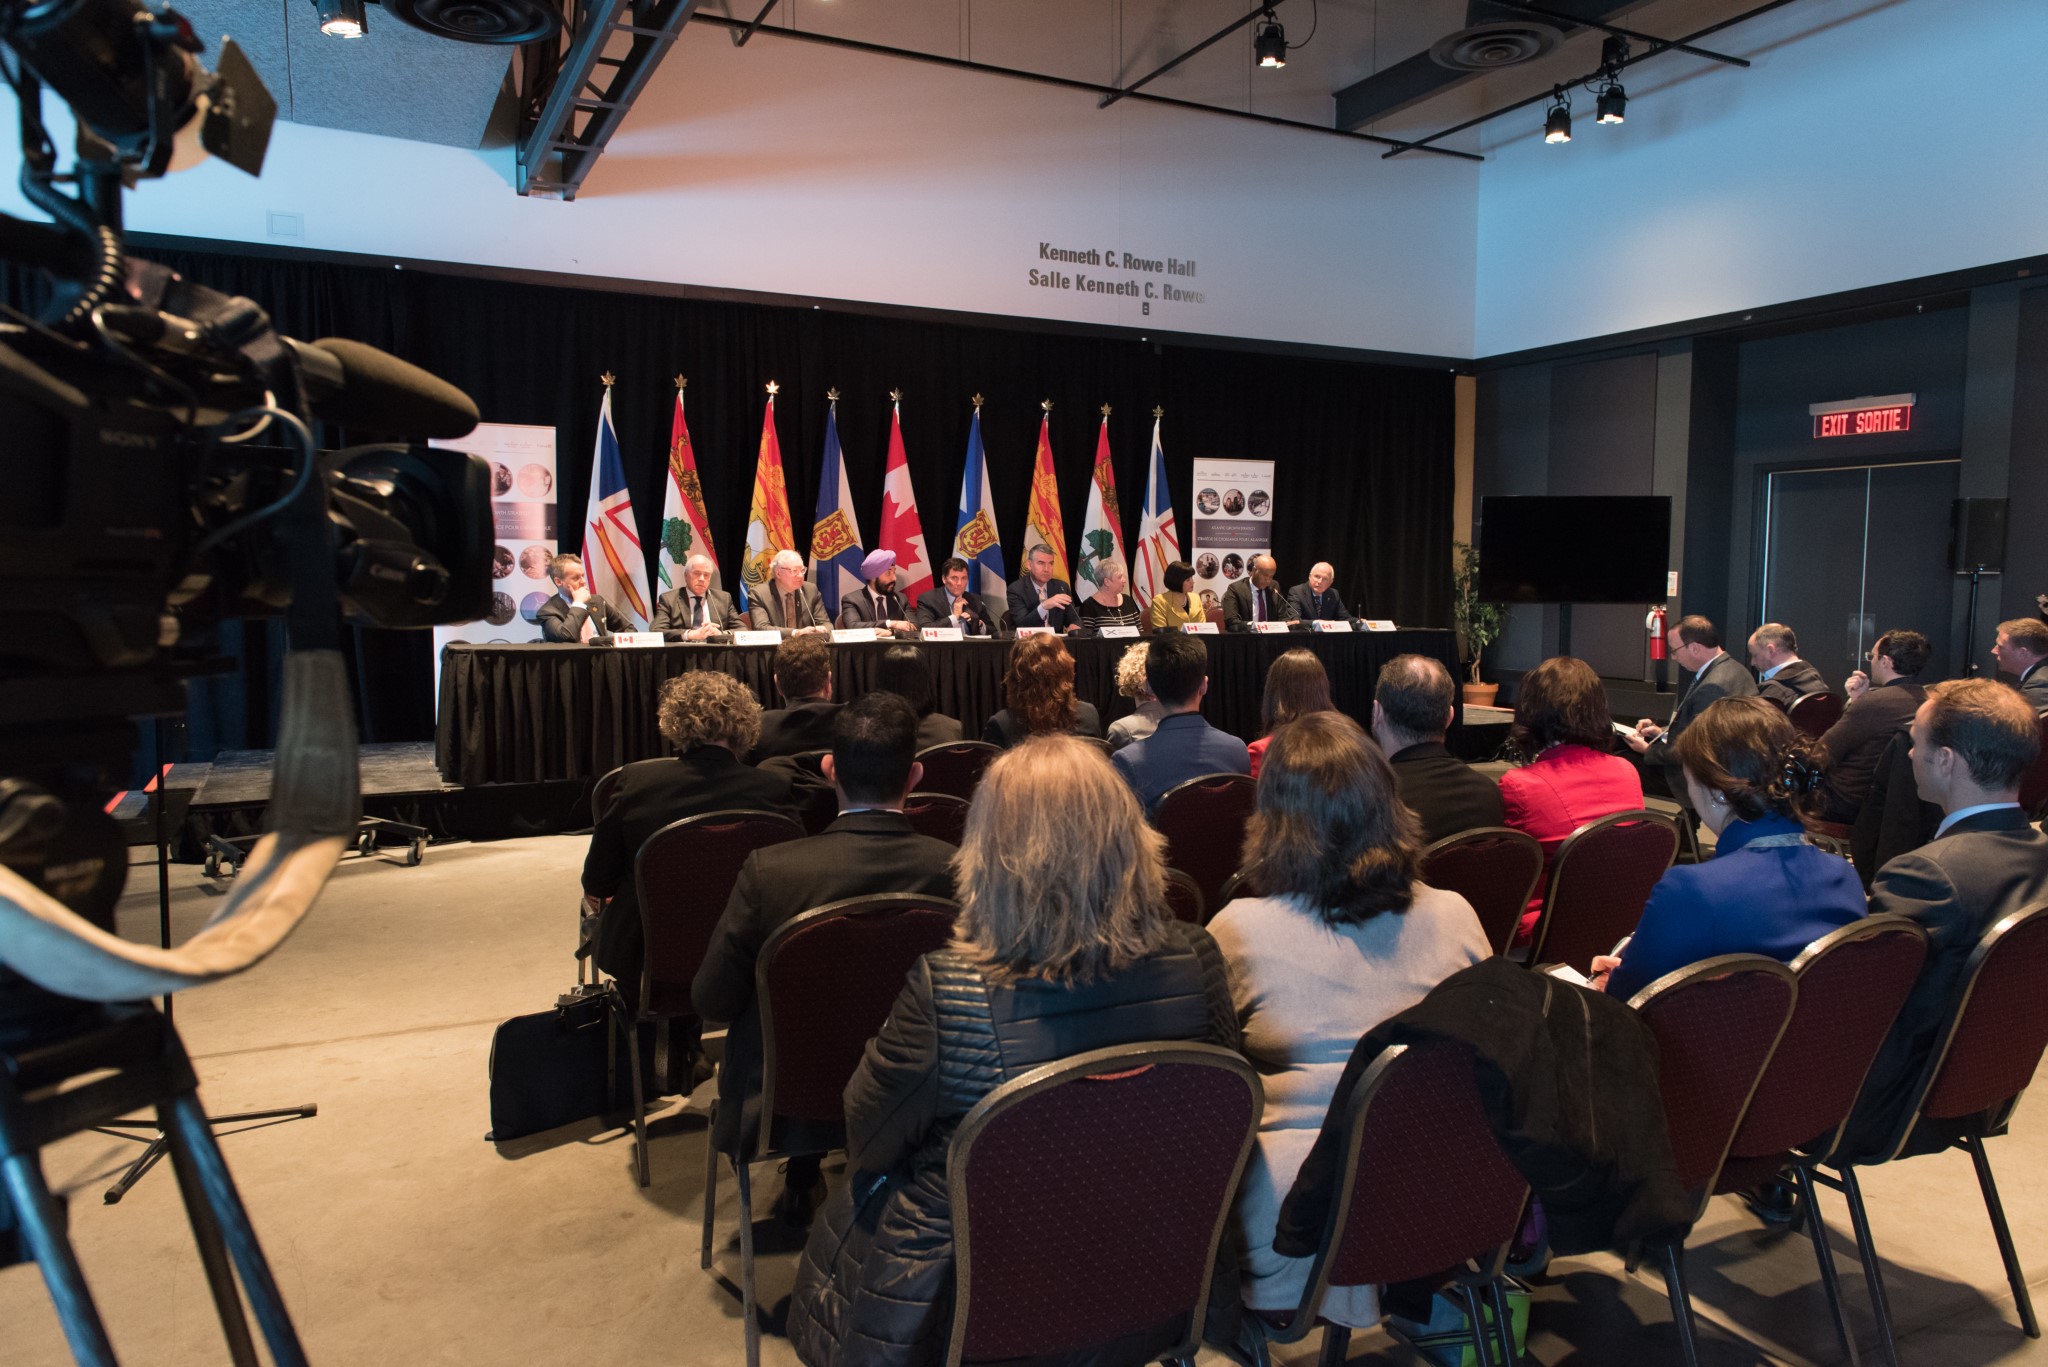 March 1, 2019 – Premiers and ministers met in Halifax, Nova Scotia to report on the positive impact of the Atlantic Growth Strategy and to map the region’s clean energy future by developing more sustainable, reliable, and affordable electricity for Atlantic Canada. Discussions also continued on growing the region’s food industry, pursuing regulatory alignment, and addressing persistent skills gaps.